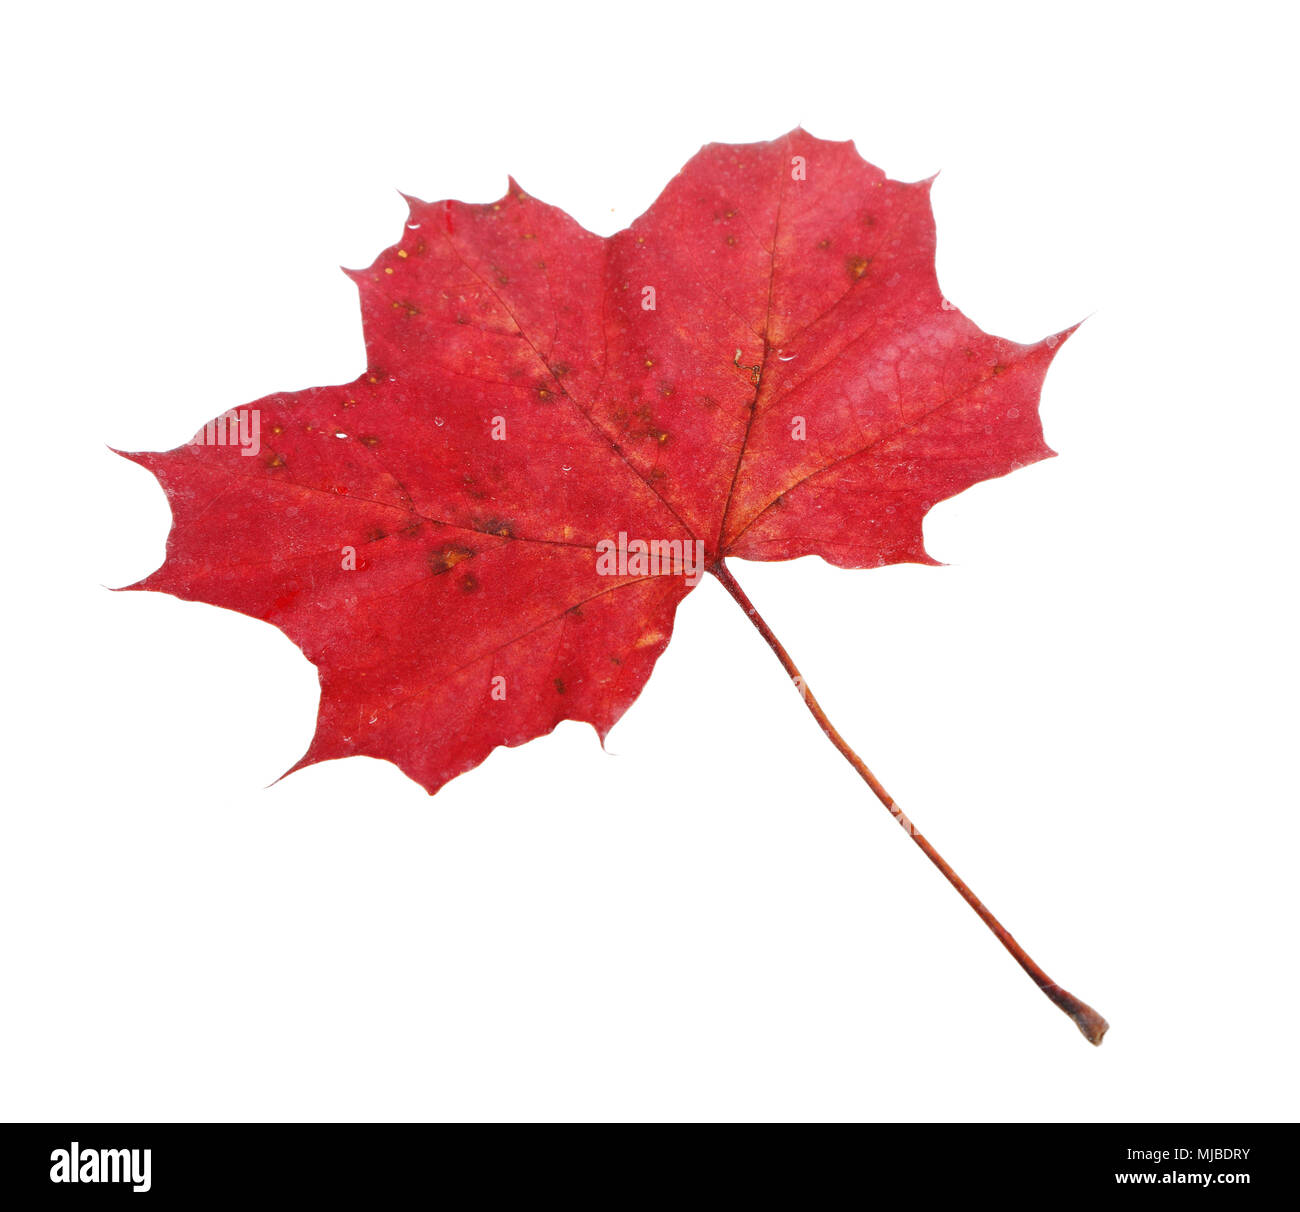 One red fallen Maple (Acer platanoides) leaf isolated on white backgrund. Stock Photo